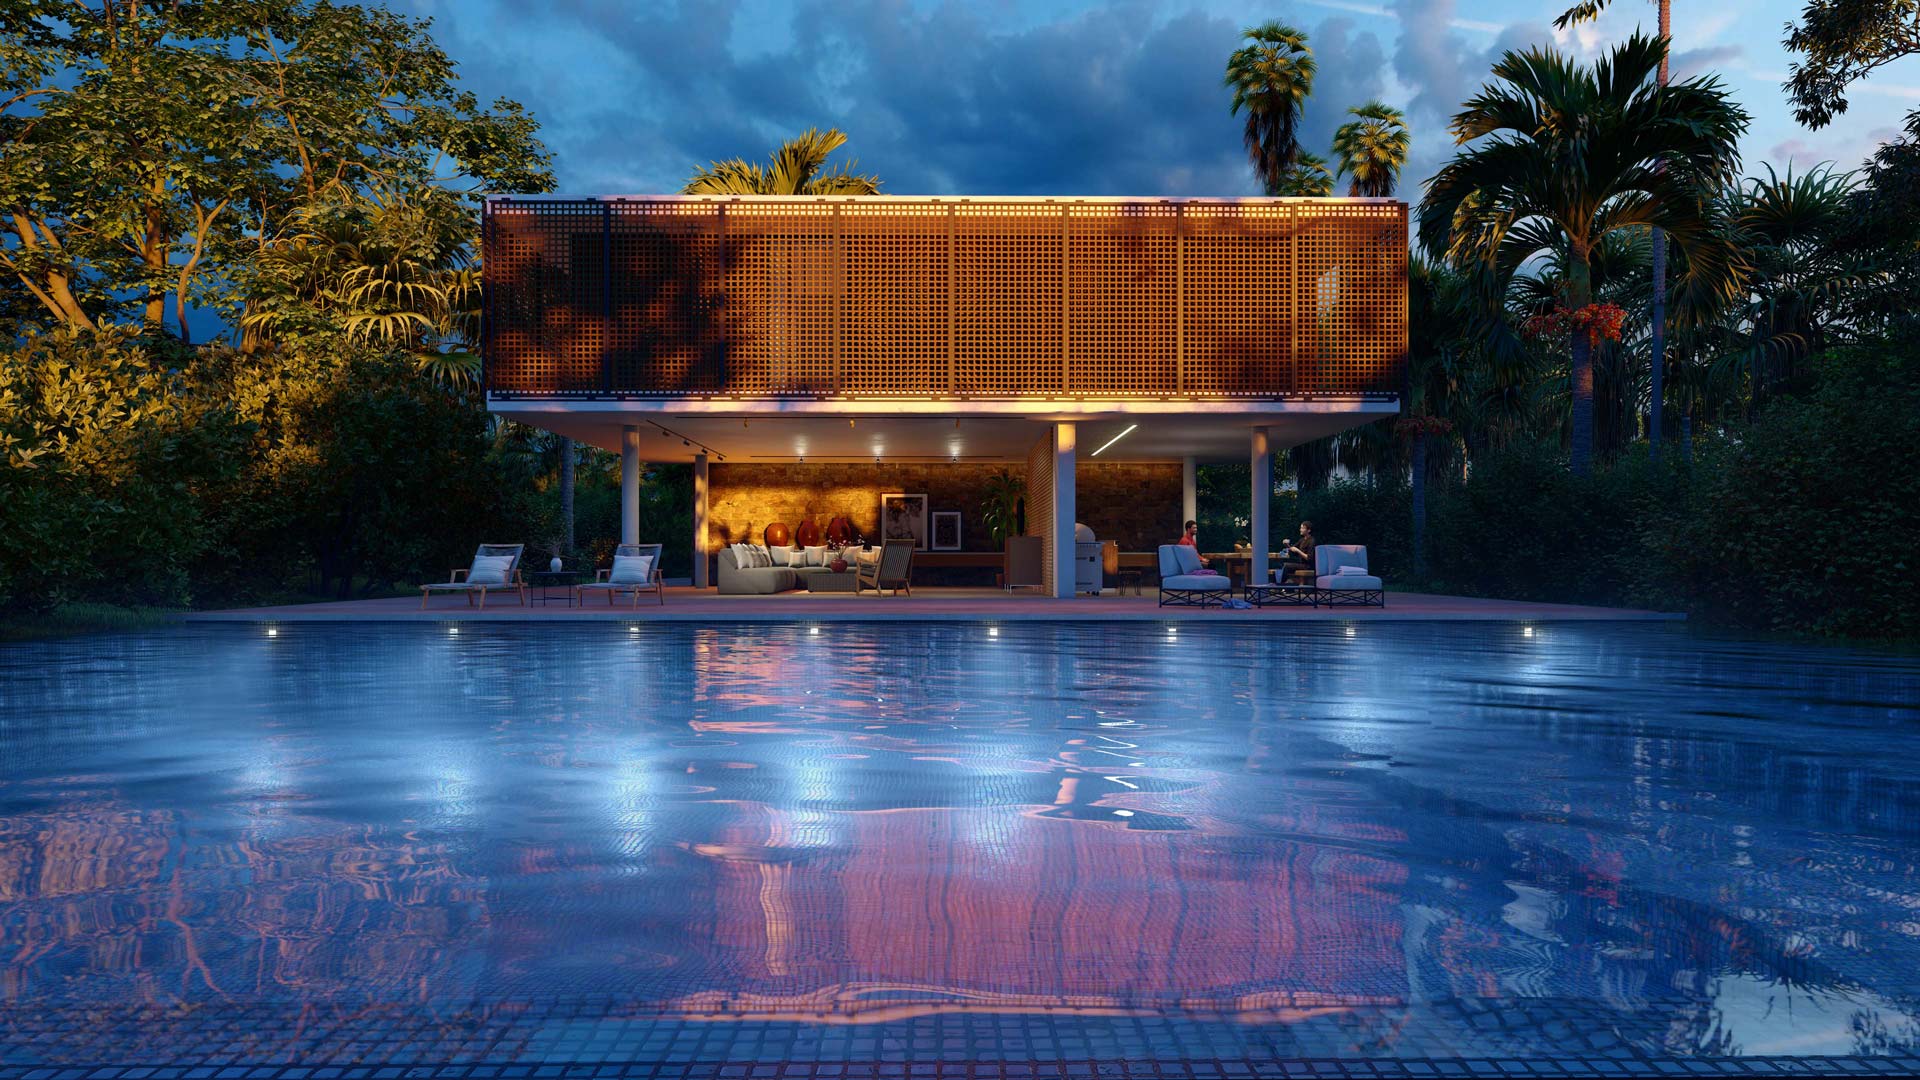 Pool House with Lights | Lumion rendering software